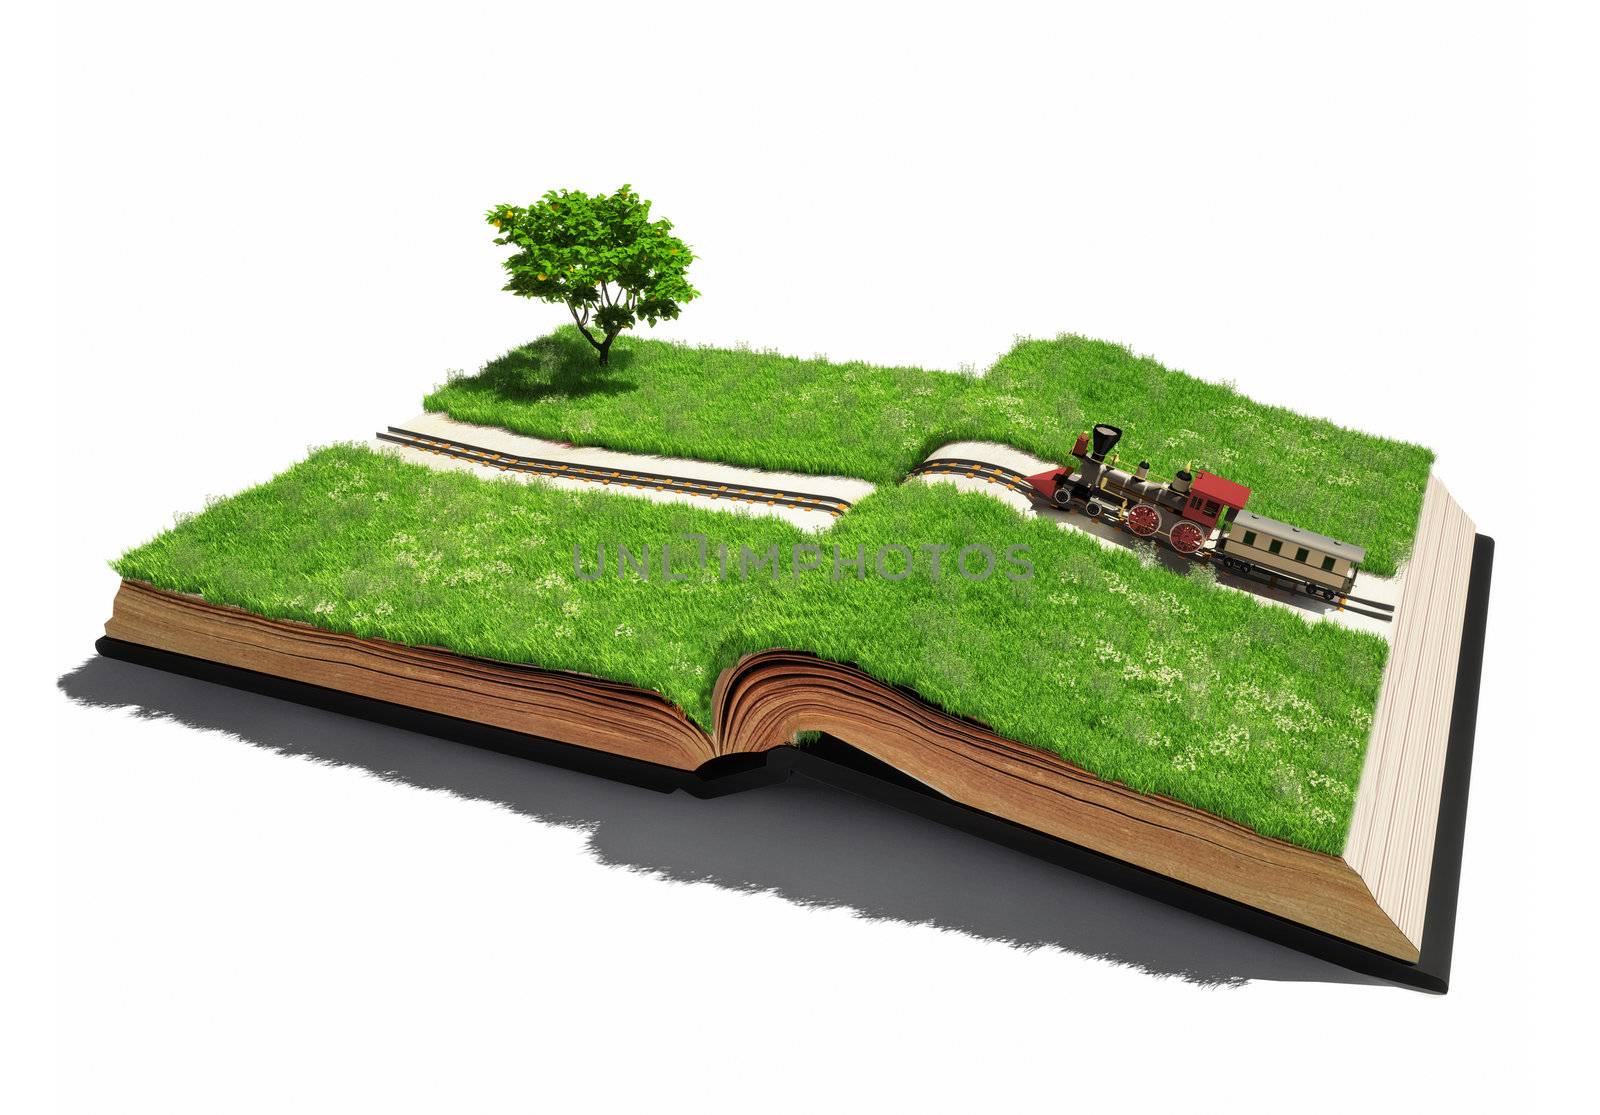 moving train on the open book pages (illustrated concept)